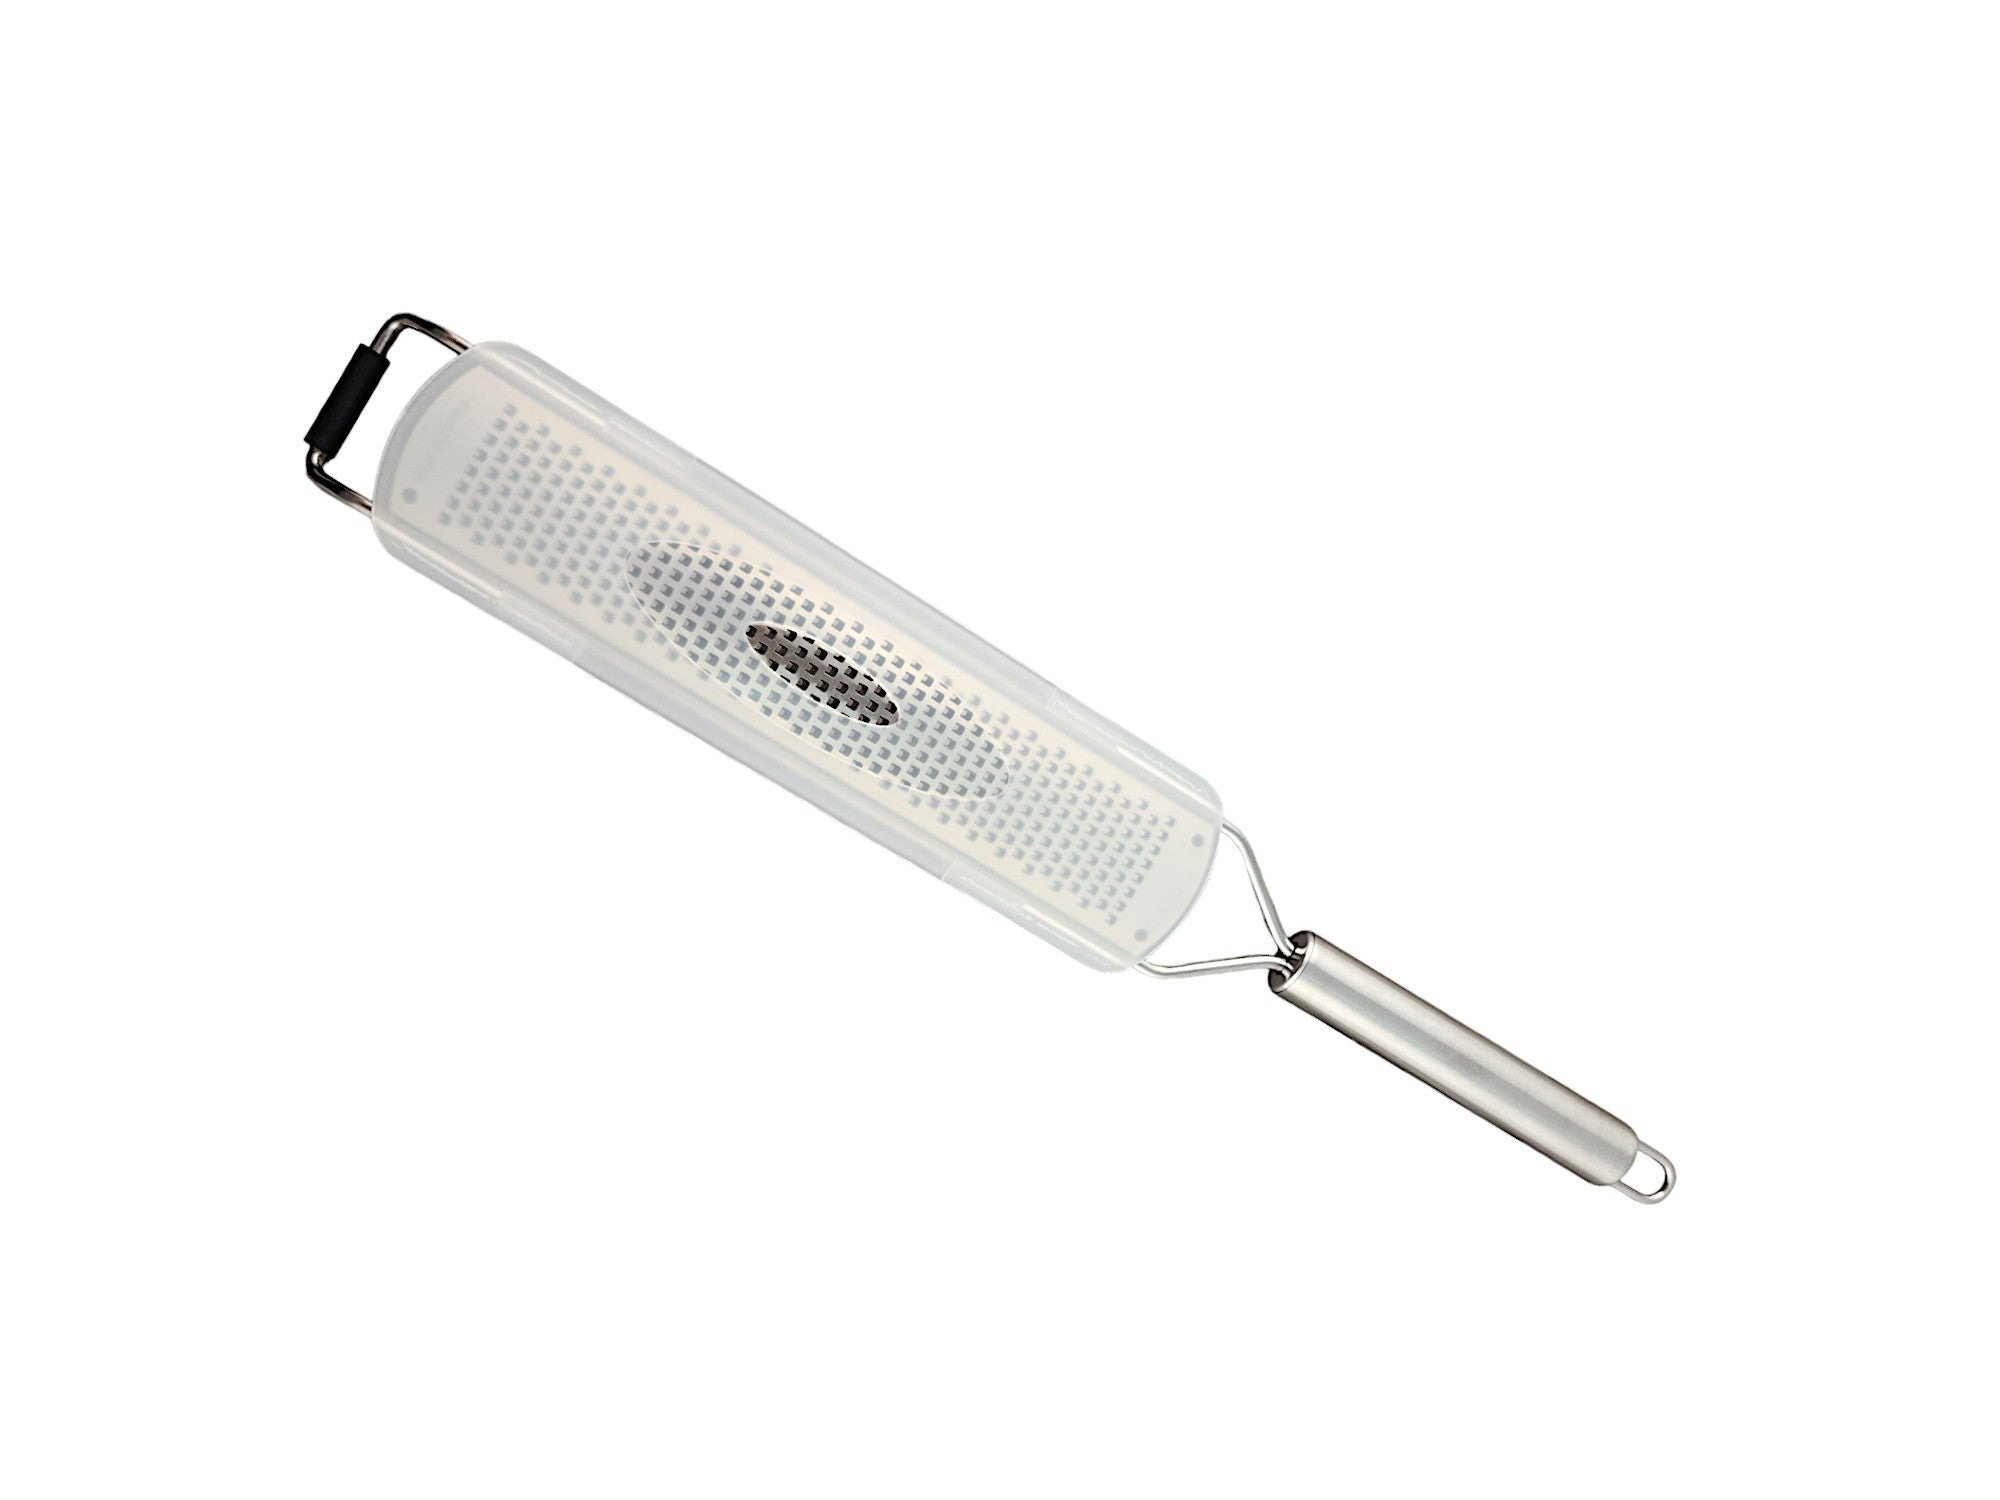 Premium Stainless Steel Zester Grater: Zest Up Your Culinary Creations